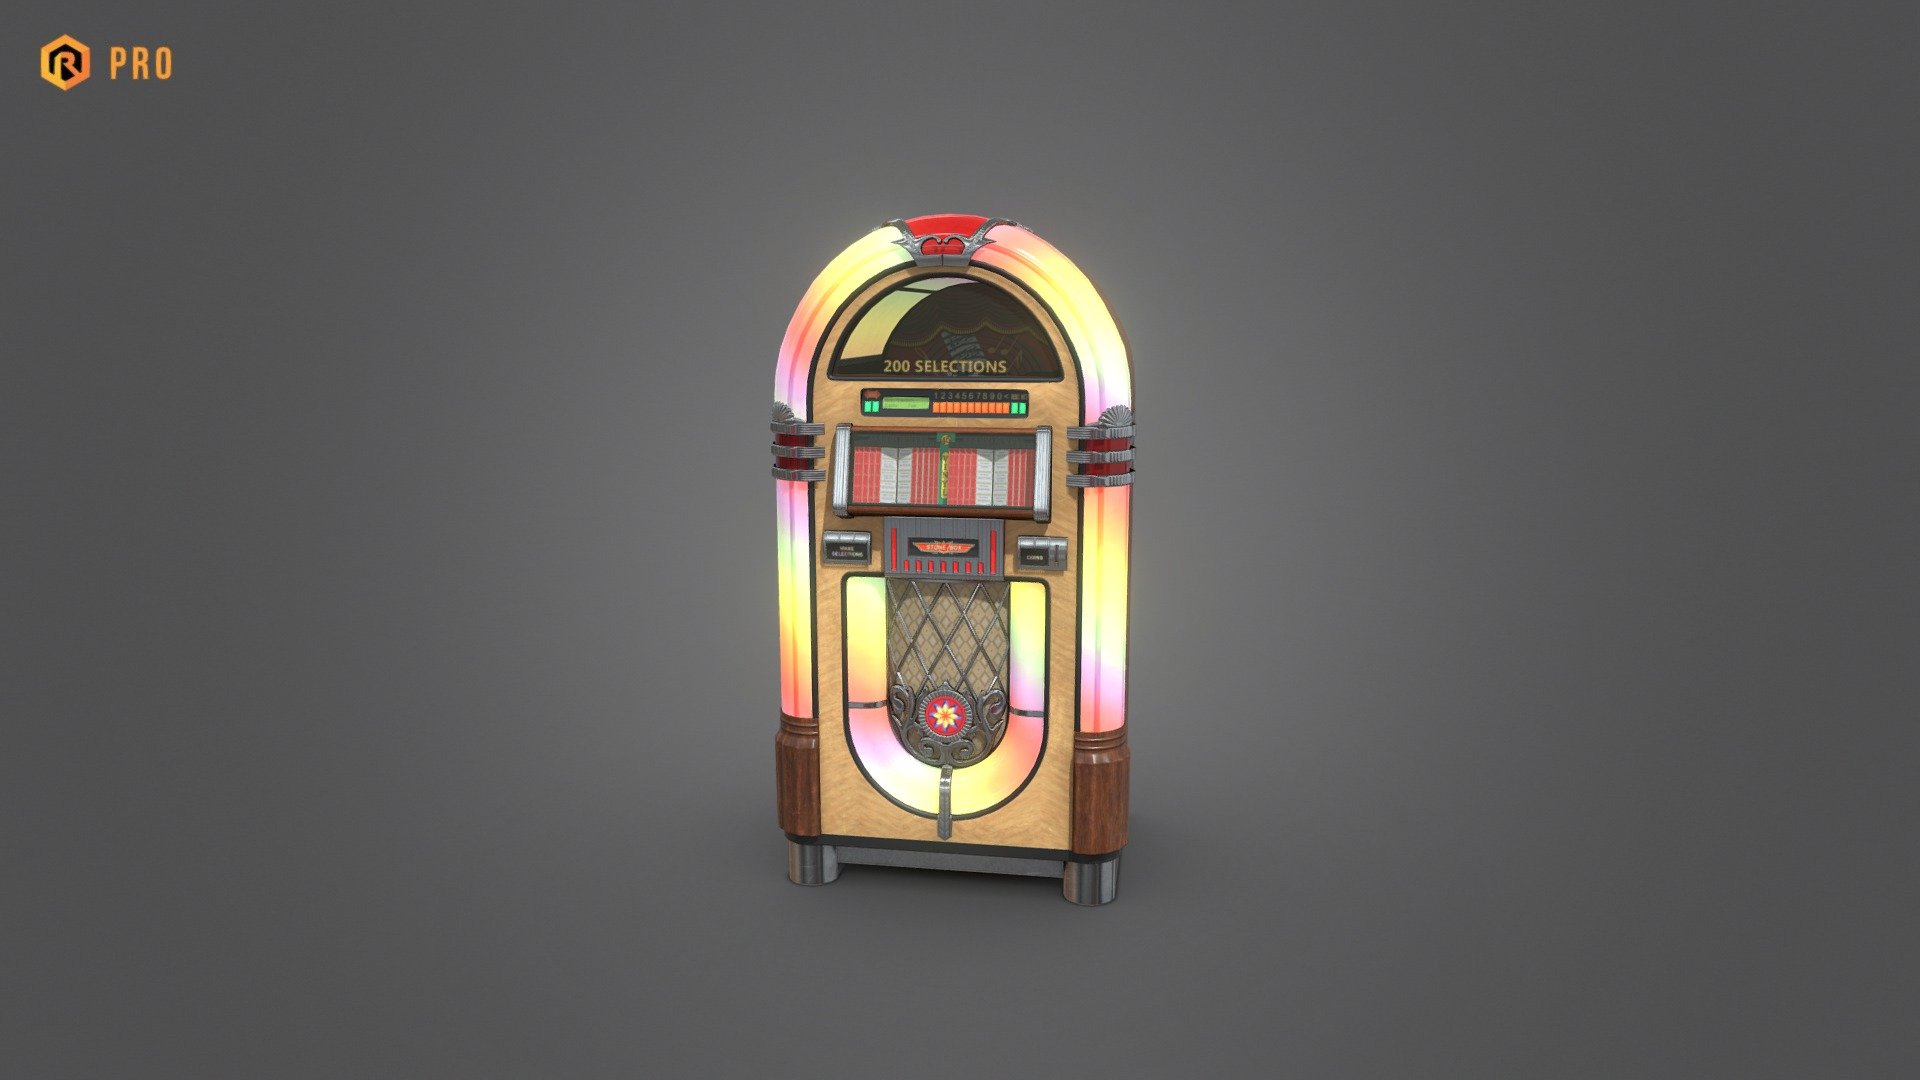 Low-poly PBR 3D model of music box called Jukebox.

This 3D model is best for use in games and other VR / AR, real-time applications such as Unity or Unreal Engine.  It can also be rendered in Blender (ex Cycles) or Vray as the model is equipped with all required PBR textures.  

This PRO version includes additional bonus assets like Substance Painer source, hi-res bake mesh, Blender Cycles/Eevee sample scenes and more!

You can download regular, FREE version for free here: https://skfb.ly/oG7TI

Technical details:




4 PBR textures sets (Main body, emission, alpha, titles) 

12413 Triangles

Model is one mesh

Lot of additional file formats included (Blender, Unity, UE4, Maya etc.)  

PRO Extra: hi-res mesh, SP source.

PRO Extra: some Blender Cycles/Eevee example scenes included

More file formats are available in additional zip file on product page.

Please feel free to contact me if you have any questions or need any support for this asset.

Support e-mail: support@rescue3d.com - Jukebox - PRO Version - Buy Royalty Free 3D model by Rescue3D Assets (@rescue3d) 3d model